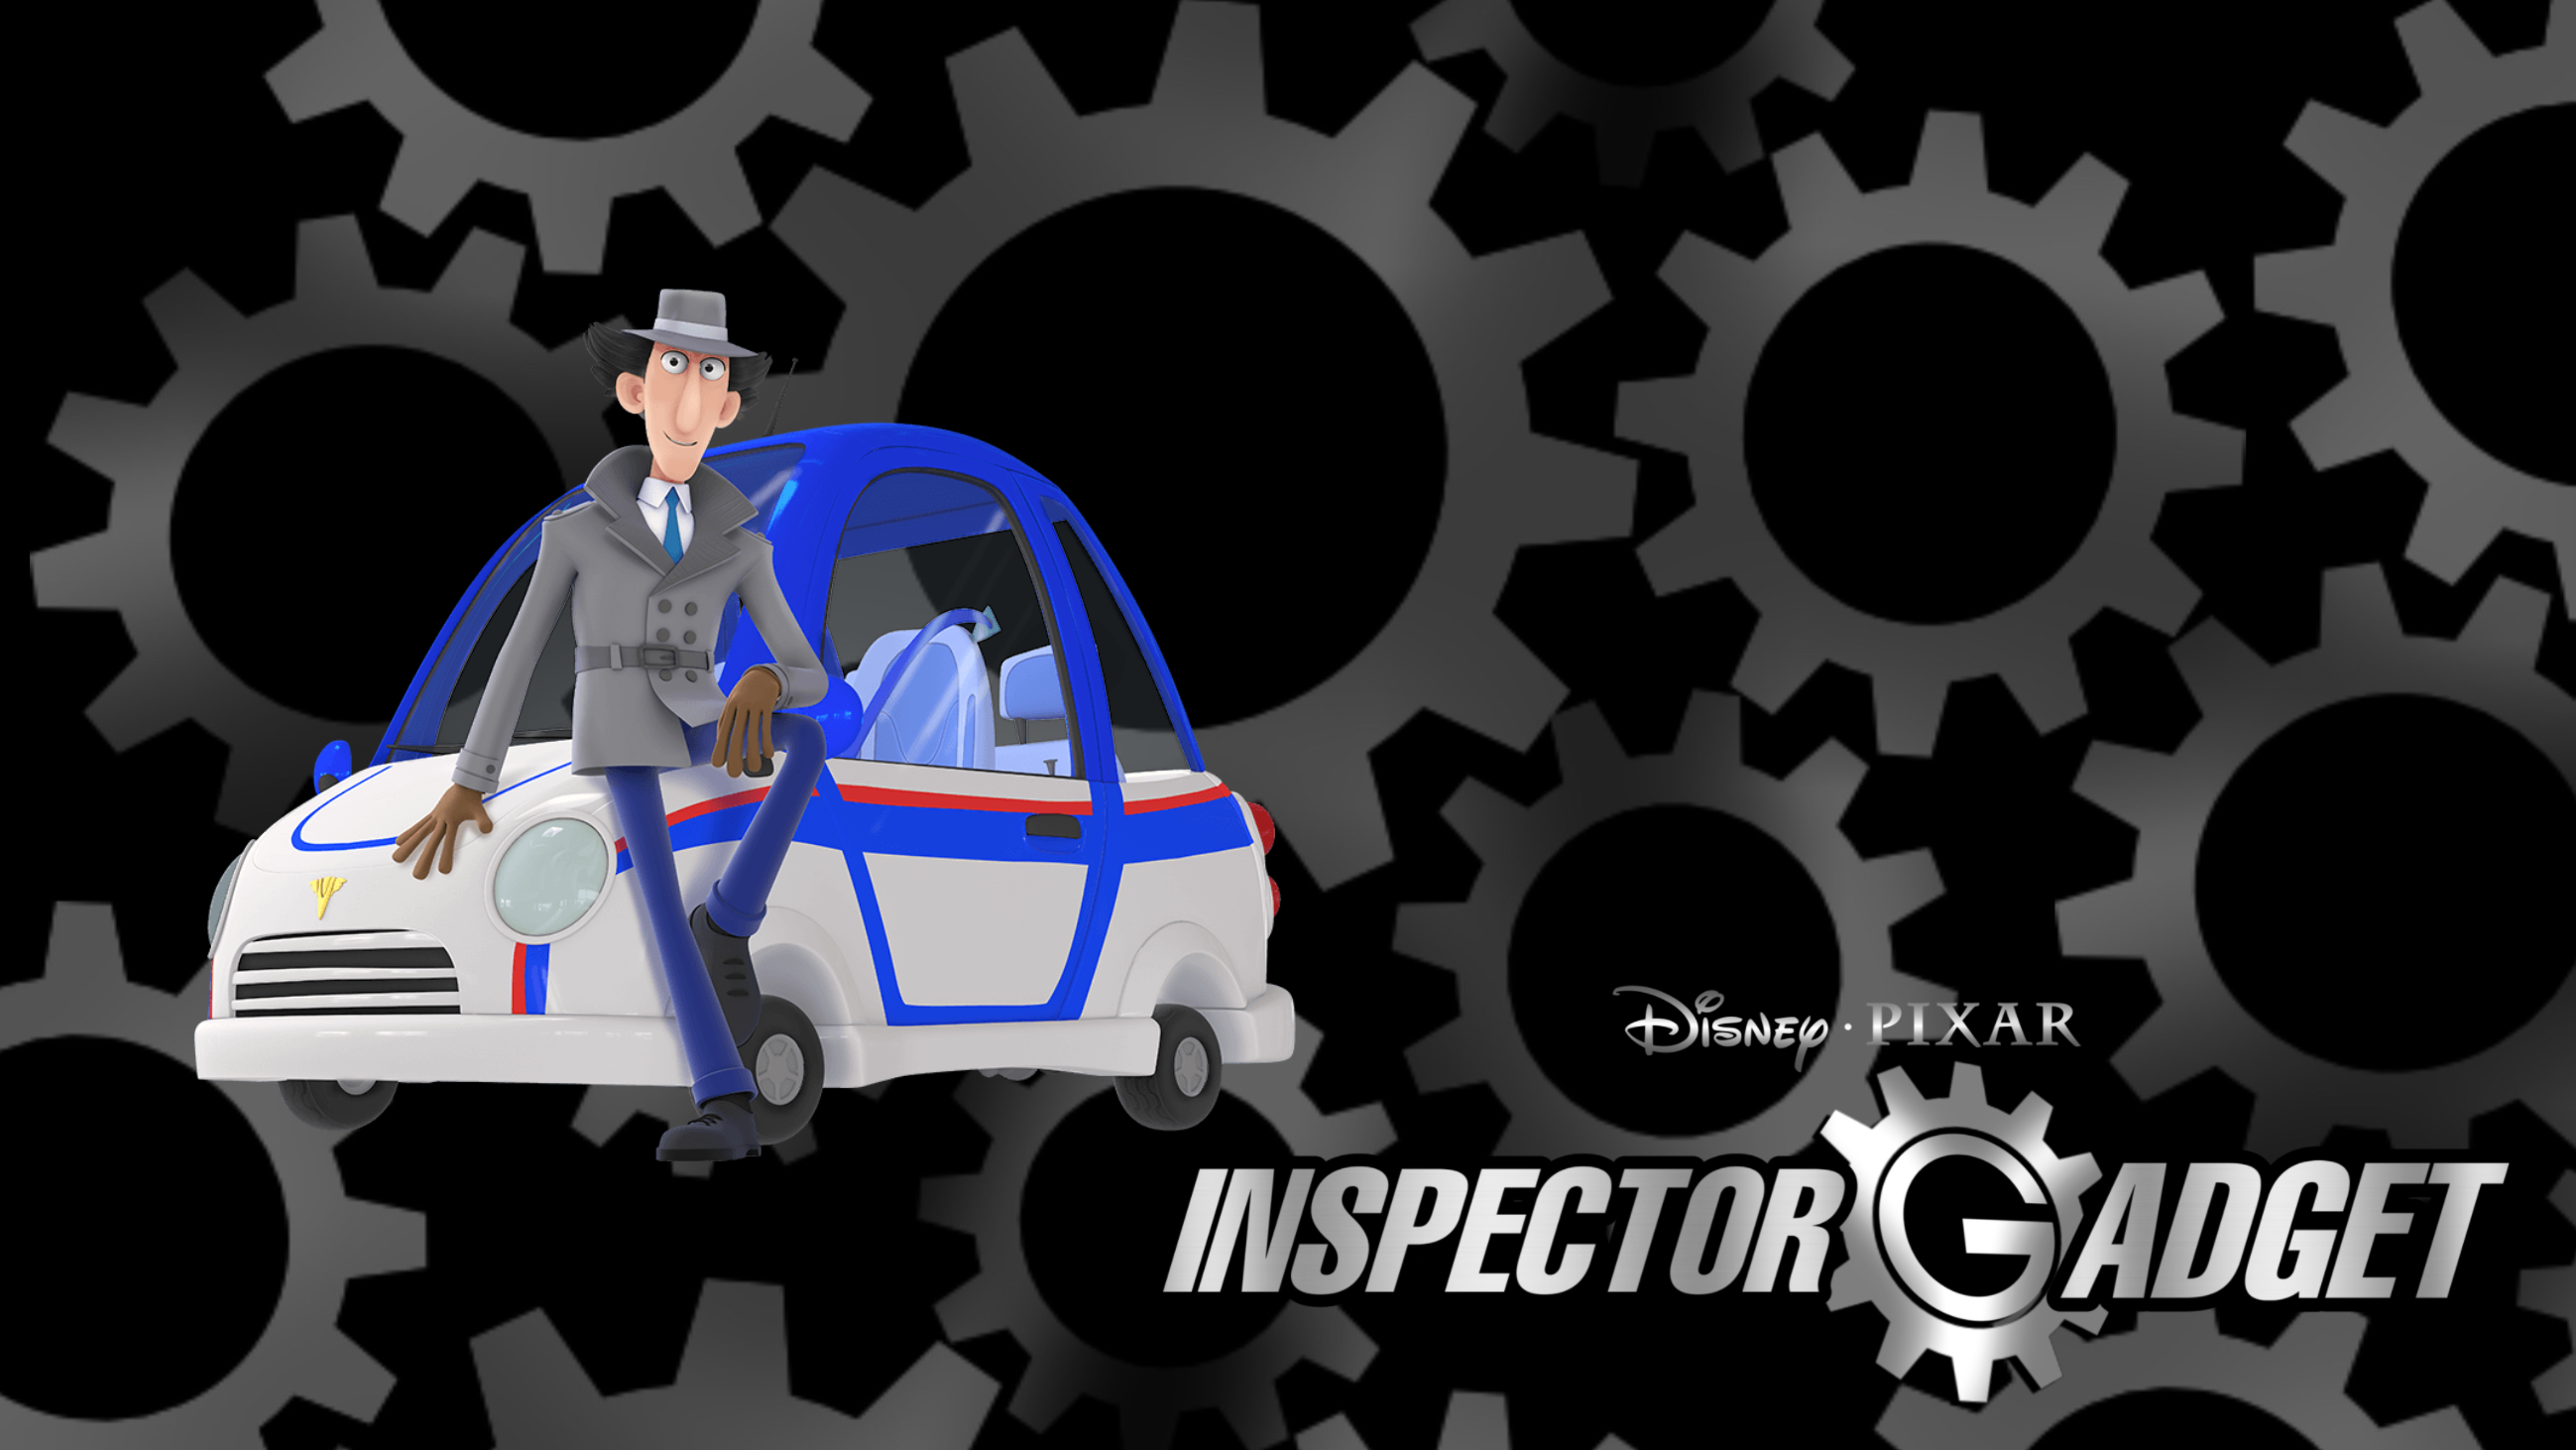 Disney Pixar Inspector Gadget Poster 2024 by seanscreations1 on